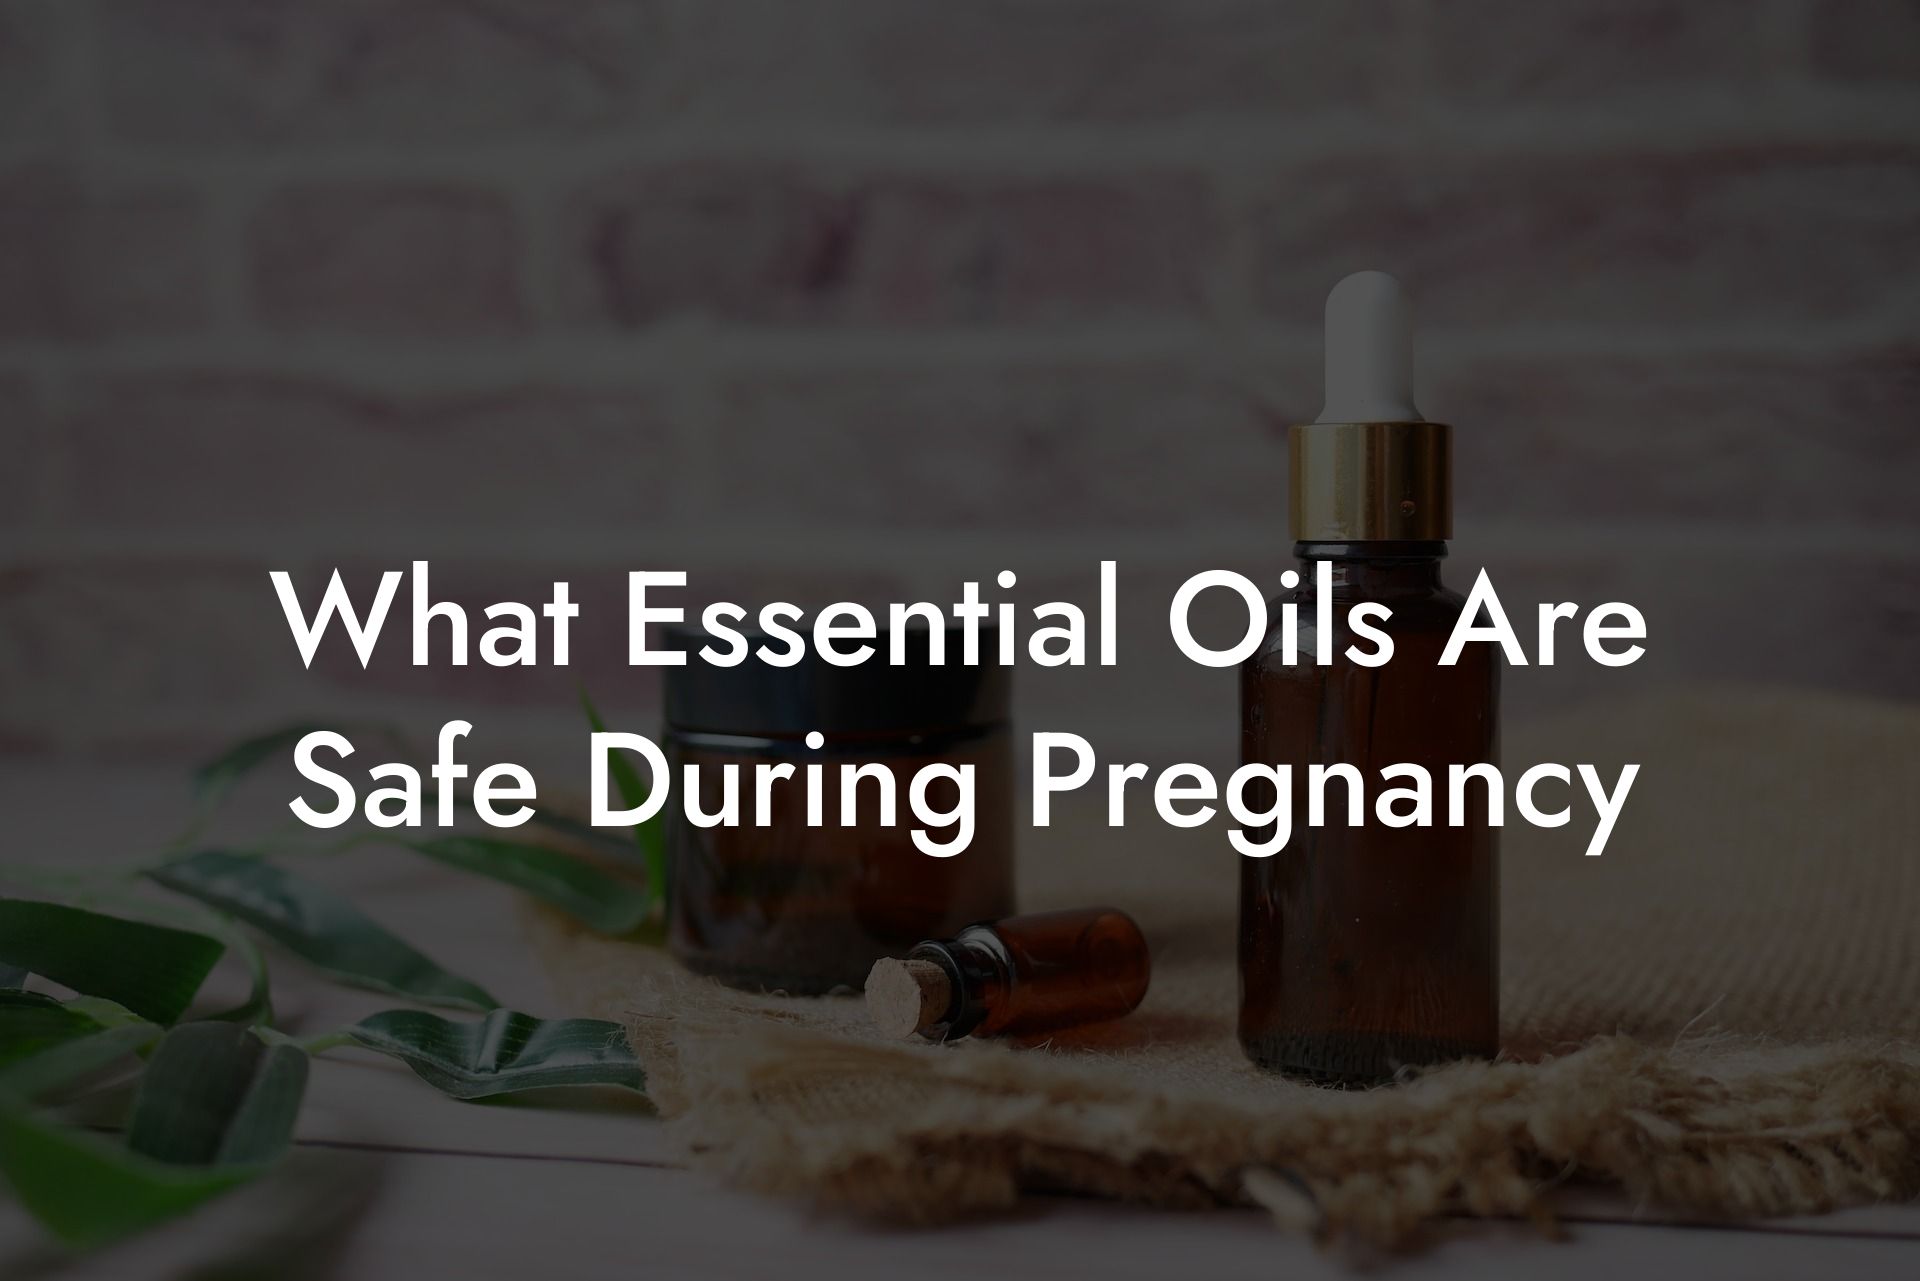 What Essential Oils Are Safe During Pregnancy